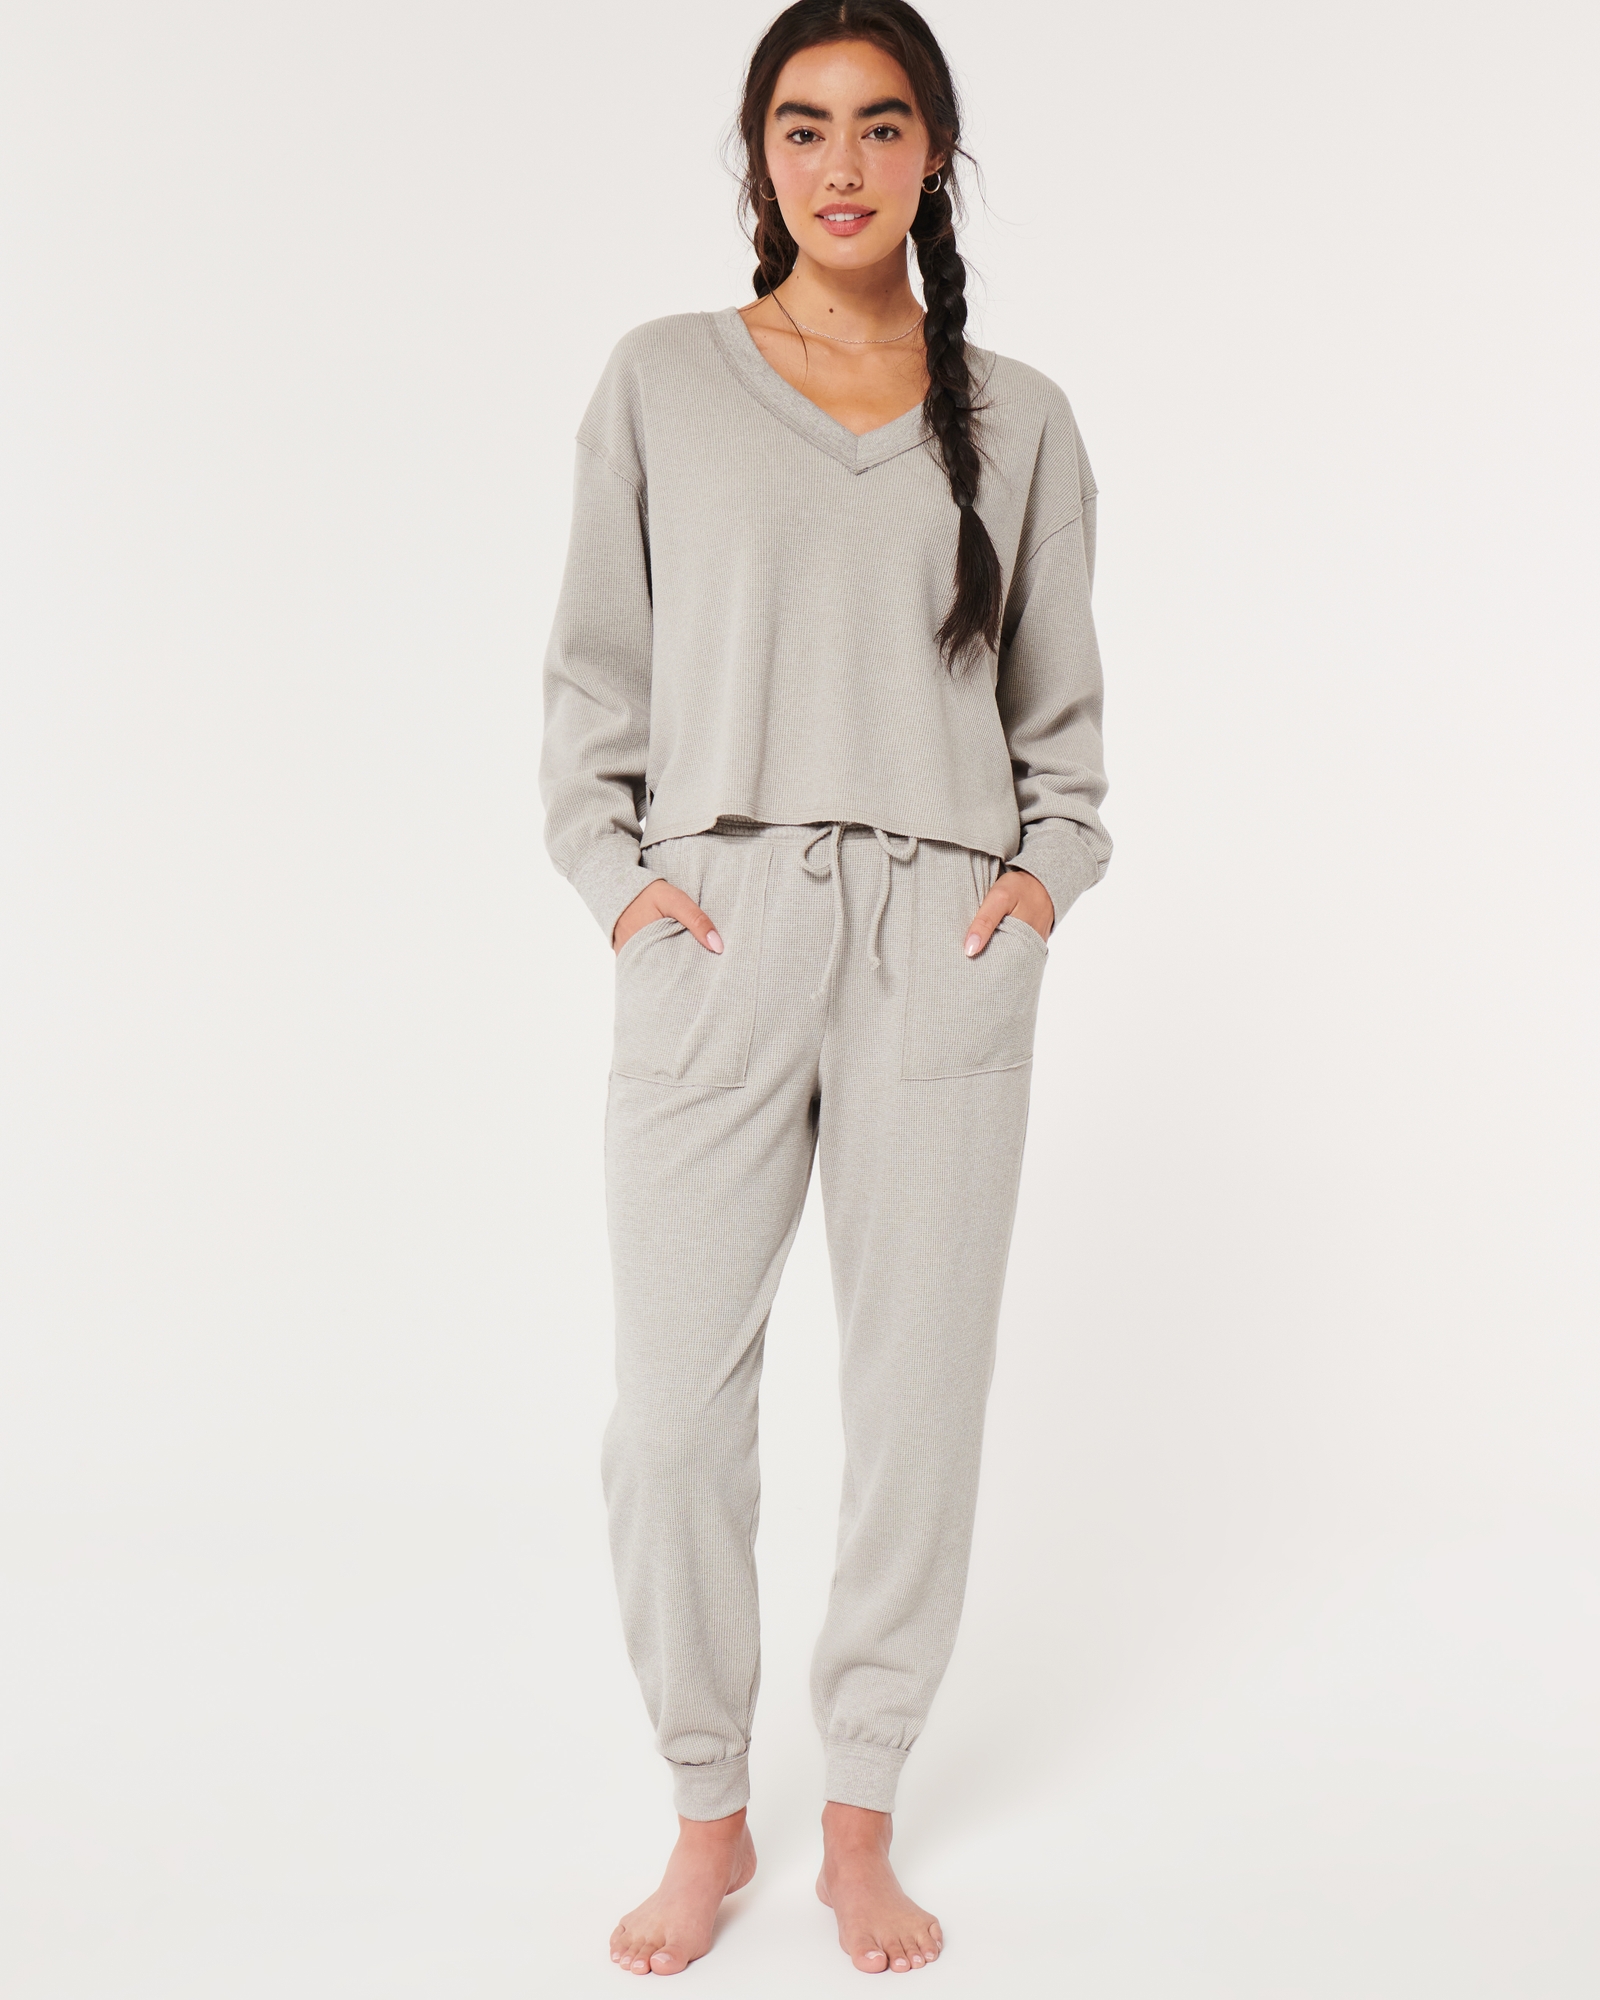 Women's Gilly Hicks Waffle Joggers